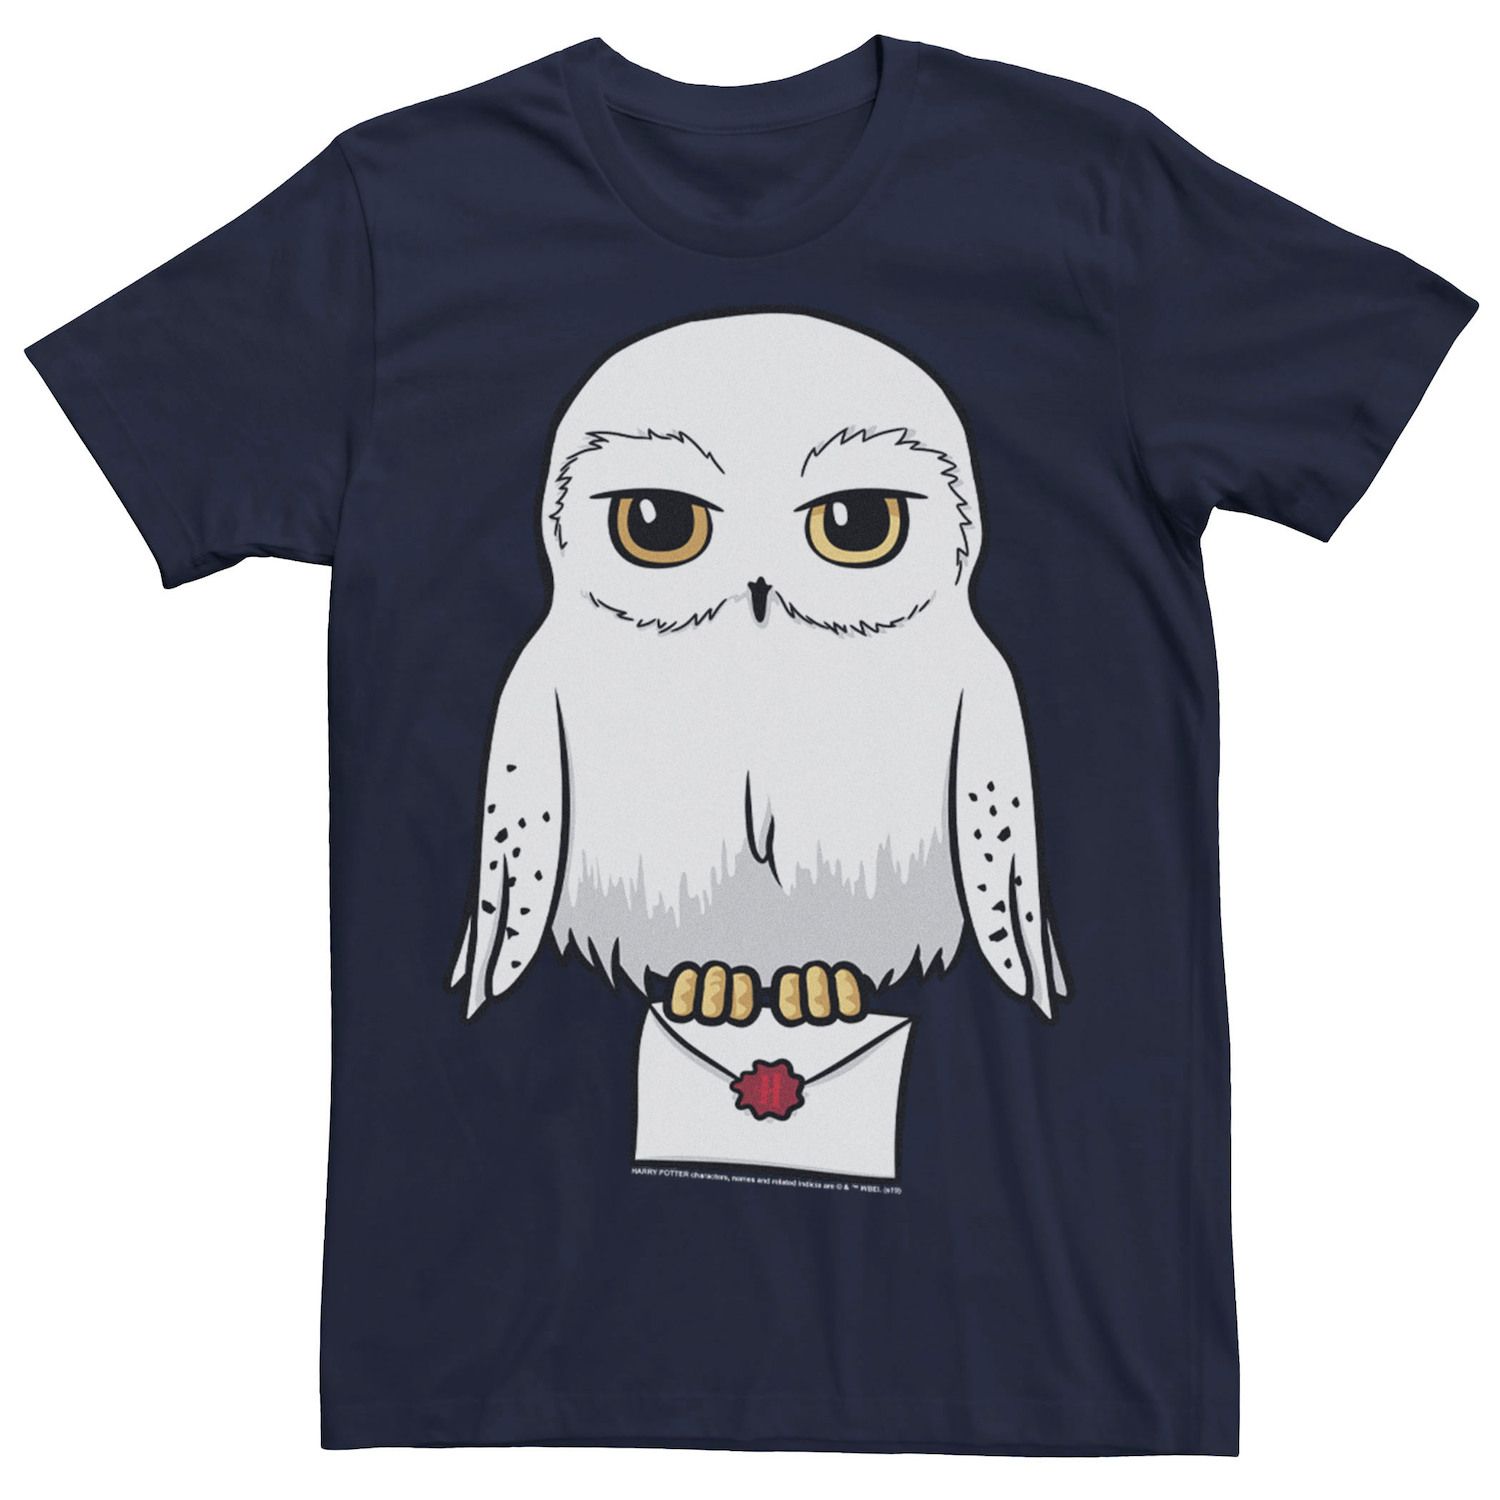 Image for Harry Potter Men's Hedwig Cute Cartoon Portrait Tee at Kohl's.